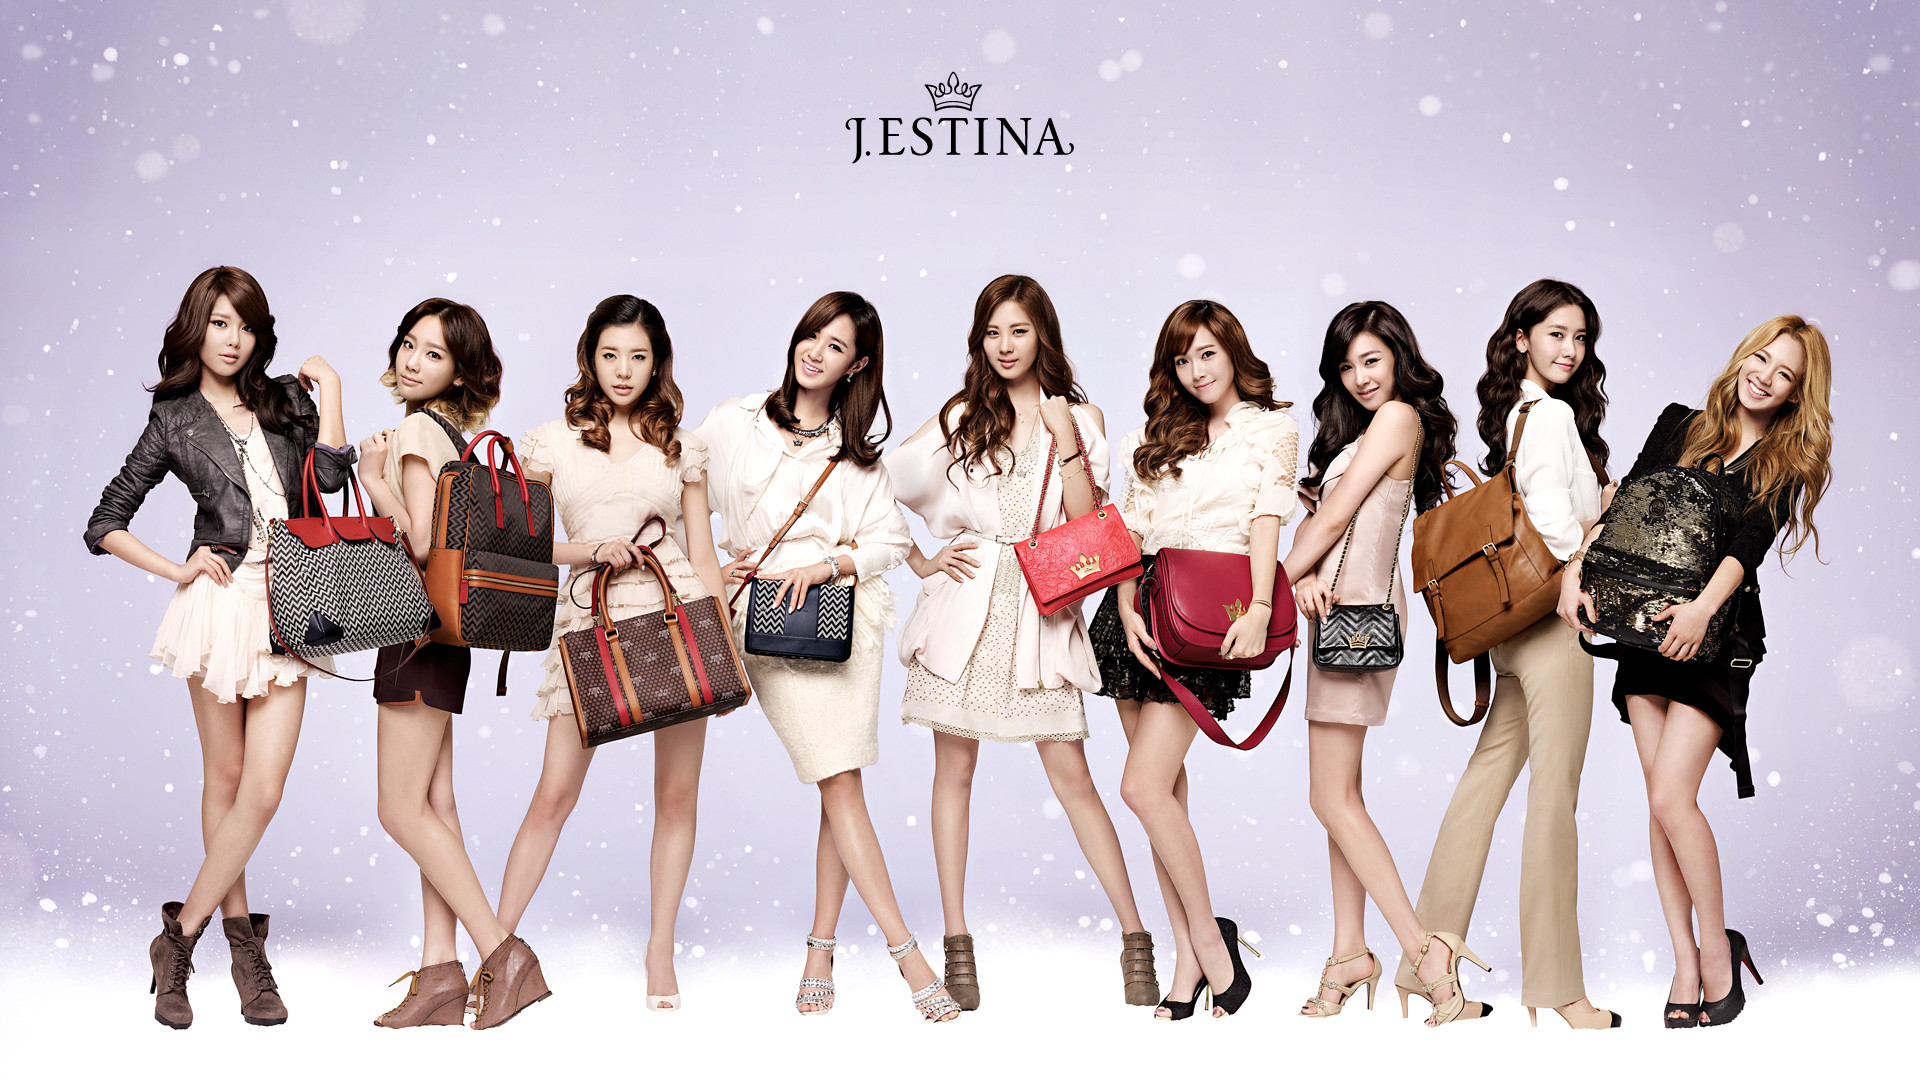 1920x1080 Snsd Wallpapers